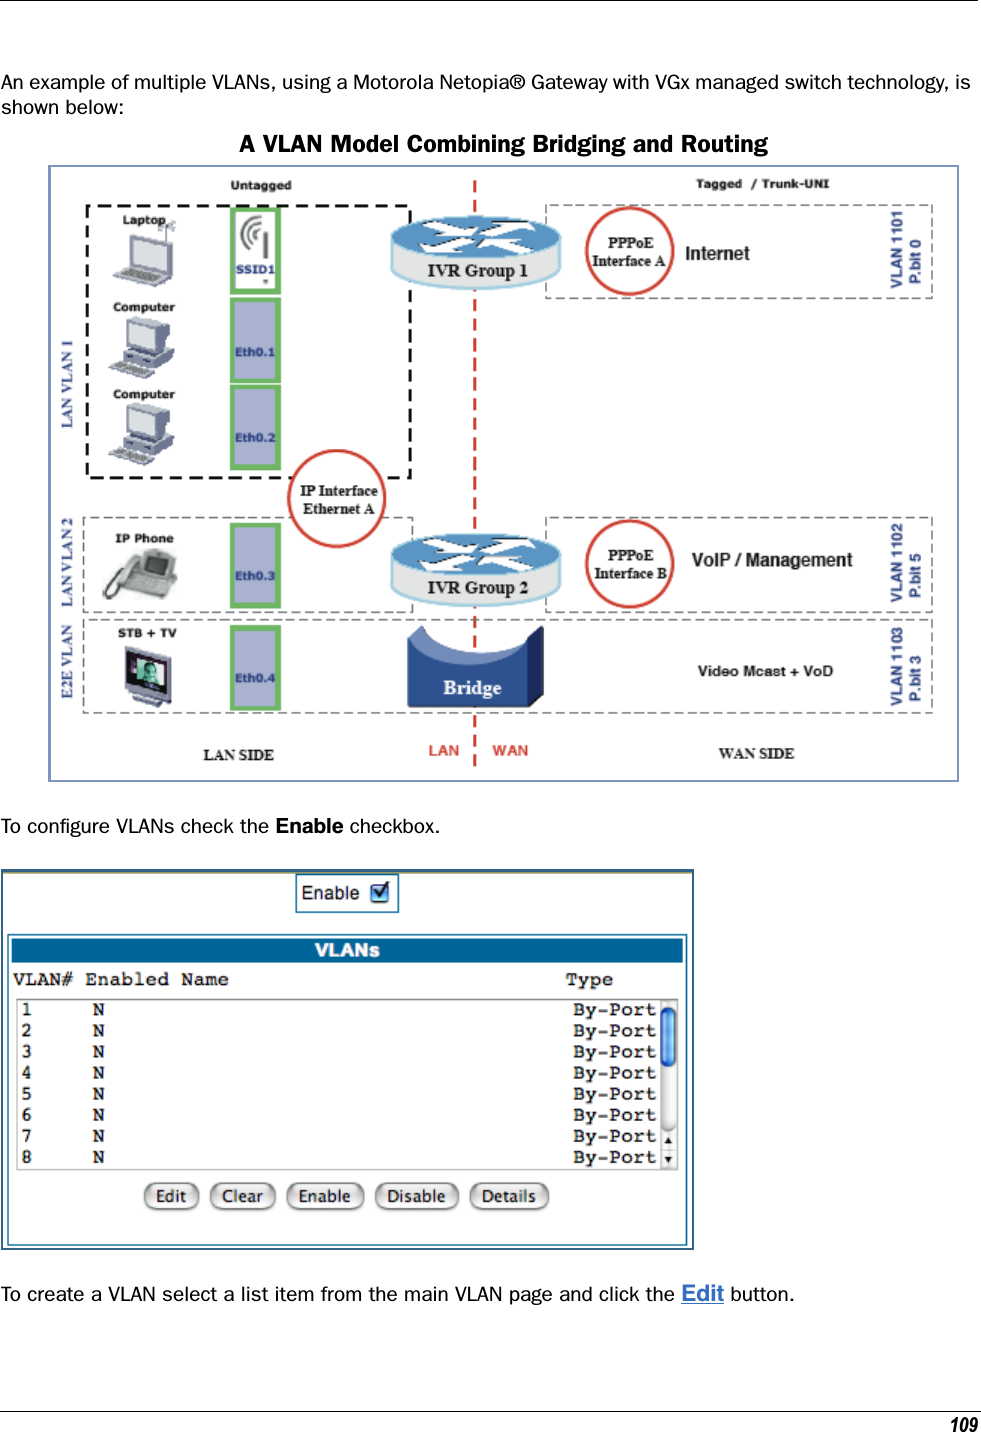 109An example of multiple VLANs, using a Motorola Netopia® Gateway with VGx managed switch technology, is shown below:A VLAN Model Combining Bridging and RoutingTo conﬁgure VLANs check the Enable checkbox.To create a VLAN select a list item from the main VLAN page and click the Edit button.